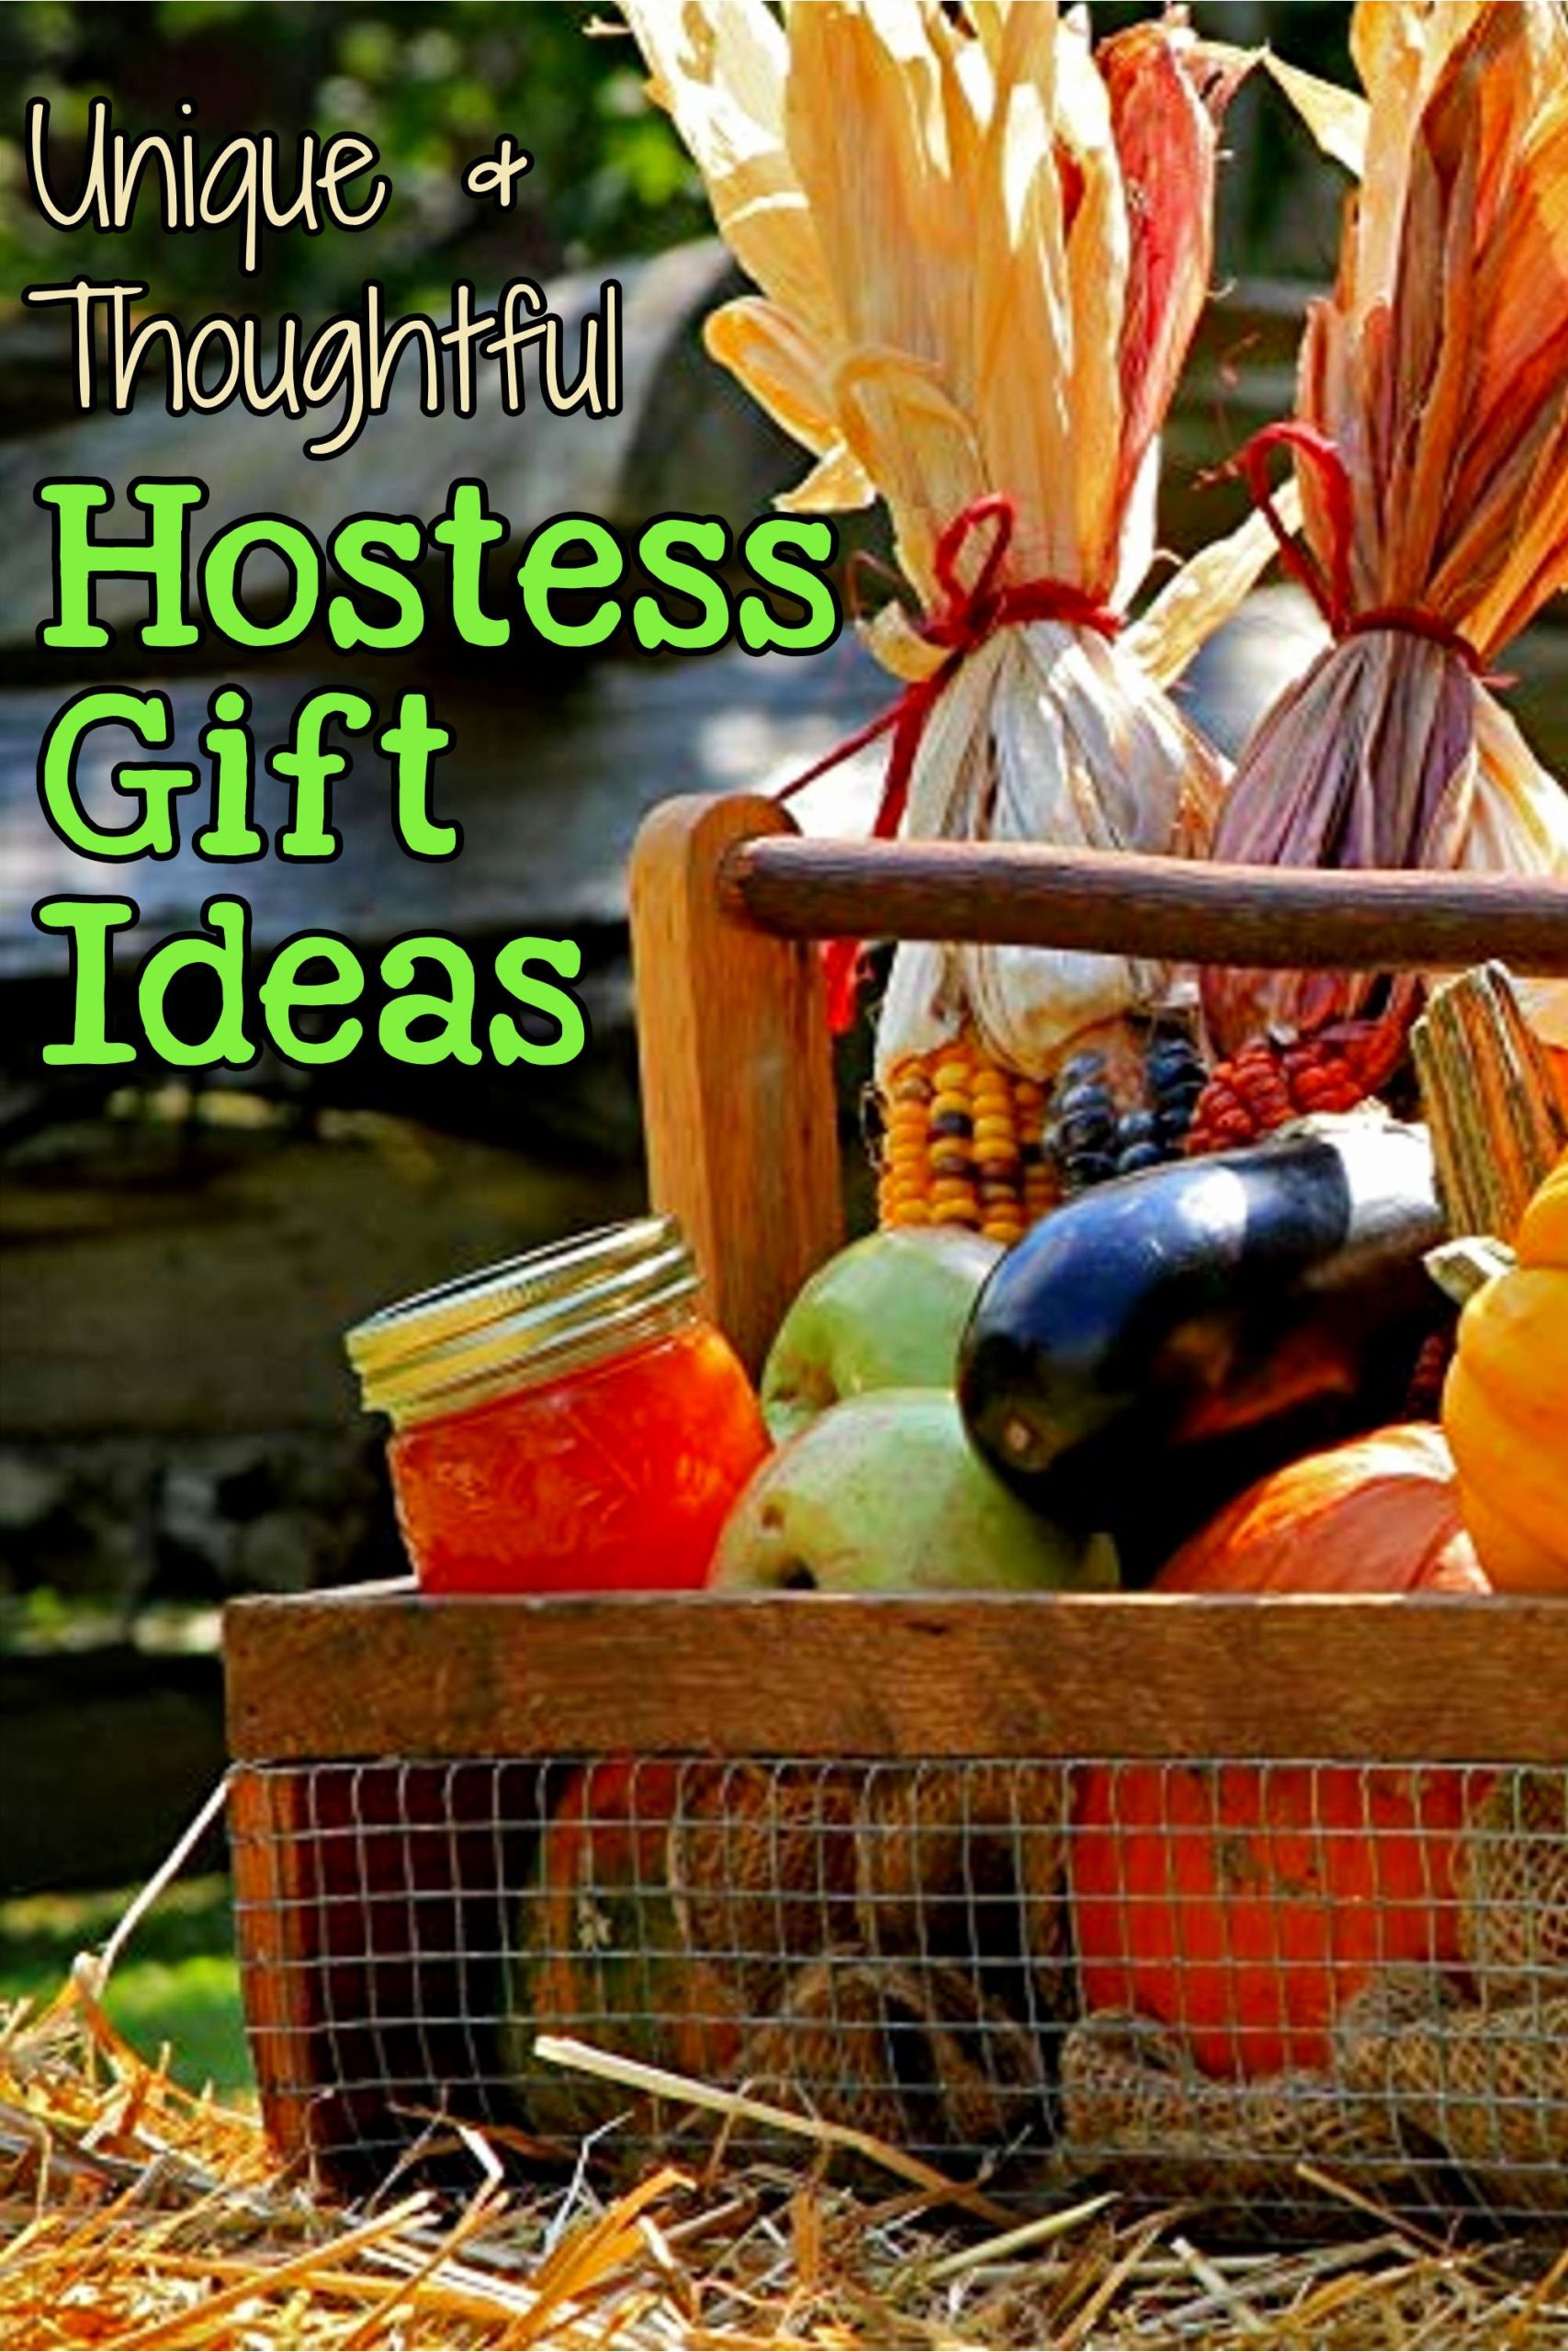 Thanksgiving Hostess Gift Ideas Homemade
 Inexpensive and Thoughtful Hostess Gifts Affordable